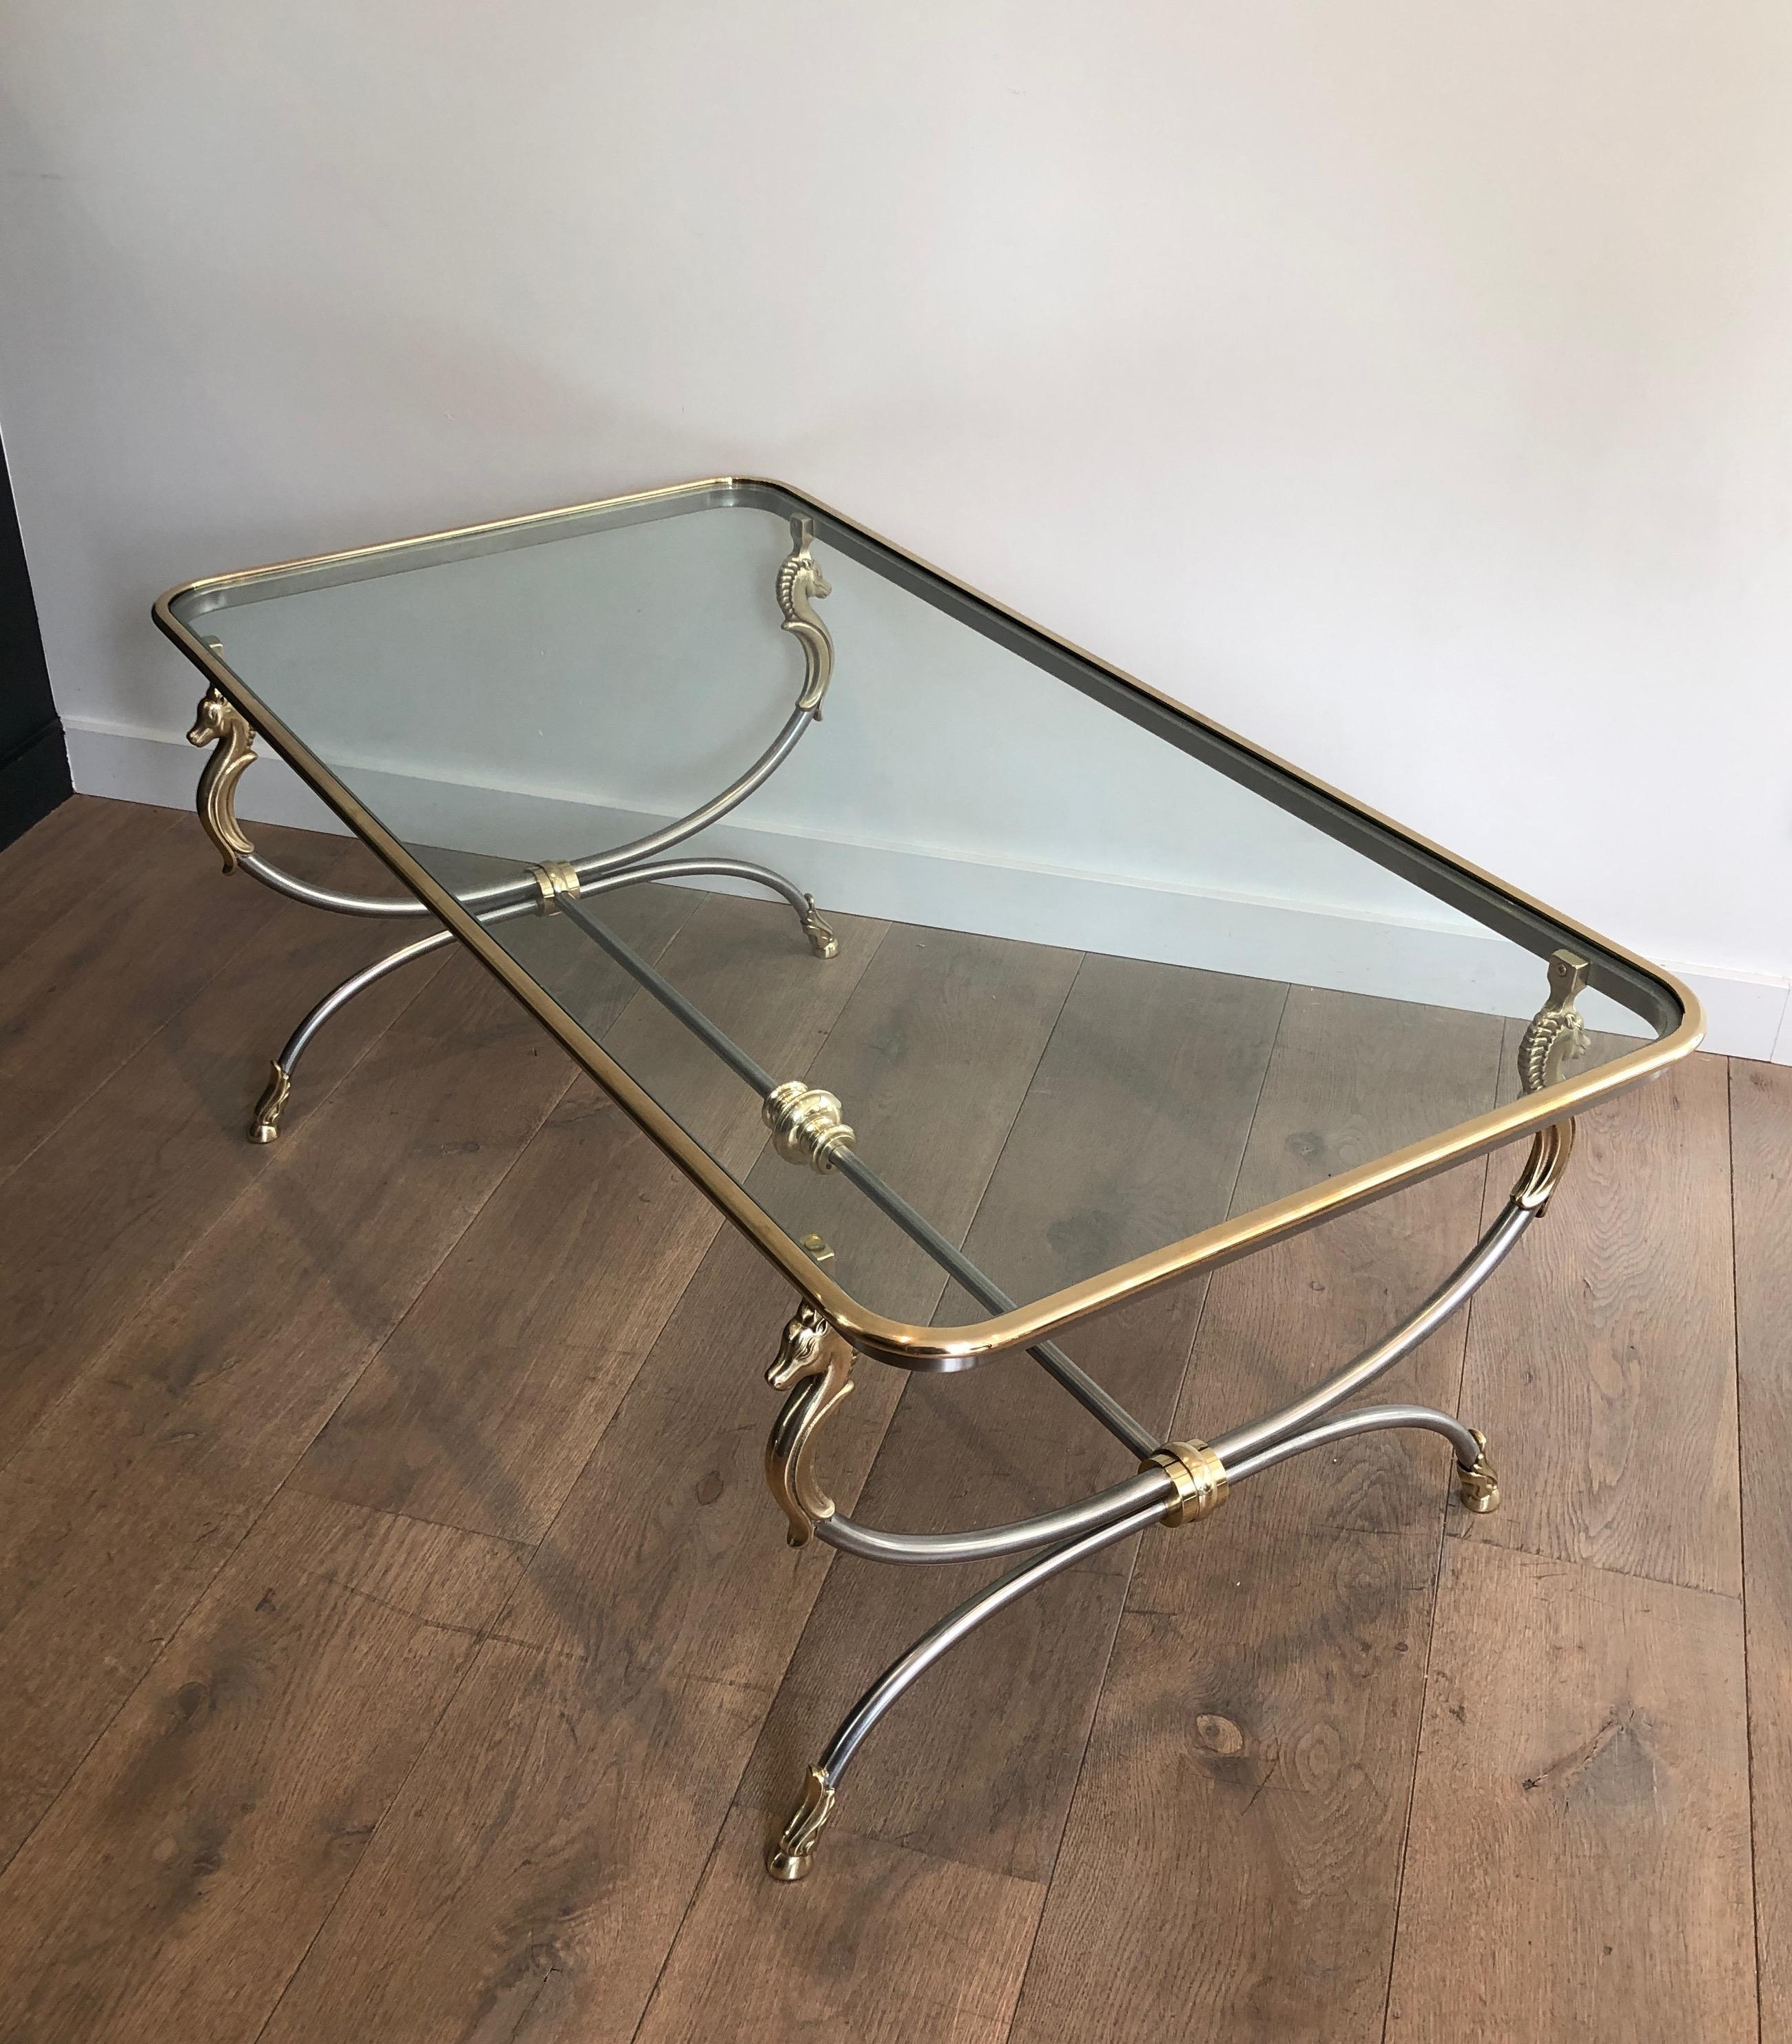 This beautiful neoclassical style coffee table is made of brushed steel and brass. This is a large cocktail table, rounded on the corners with elegant Horse heads and shoes. This is nice French work, in the style of Maison Jansen, circa 1970.